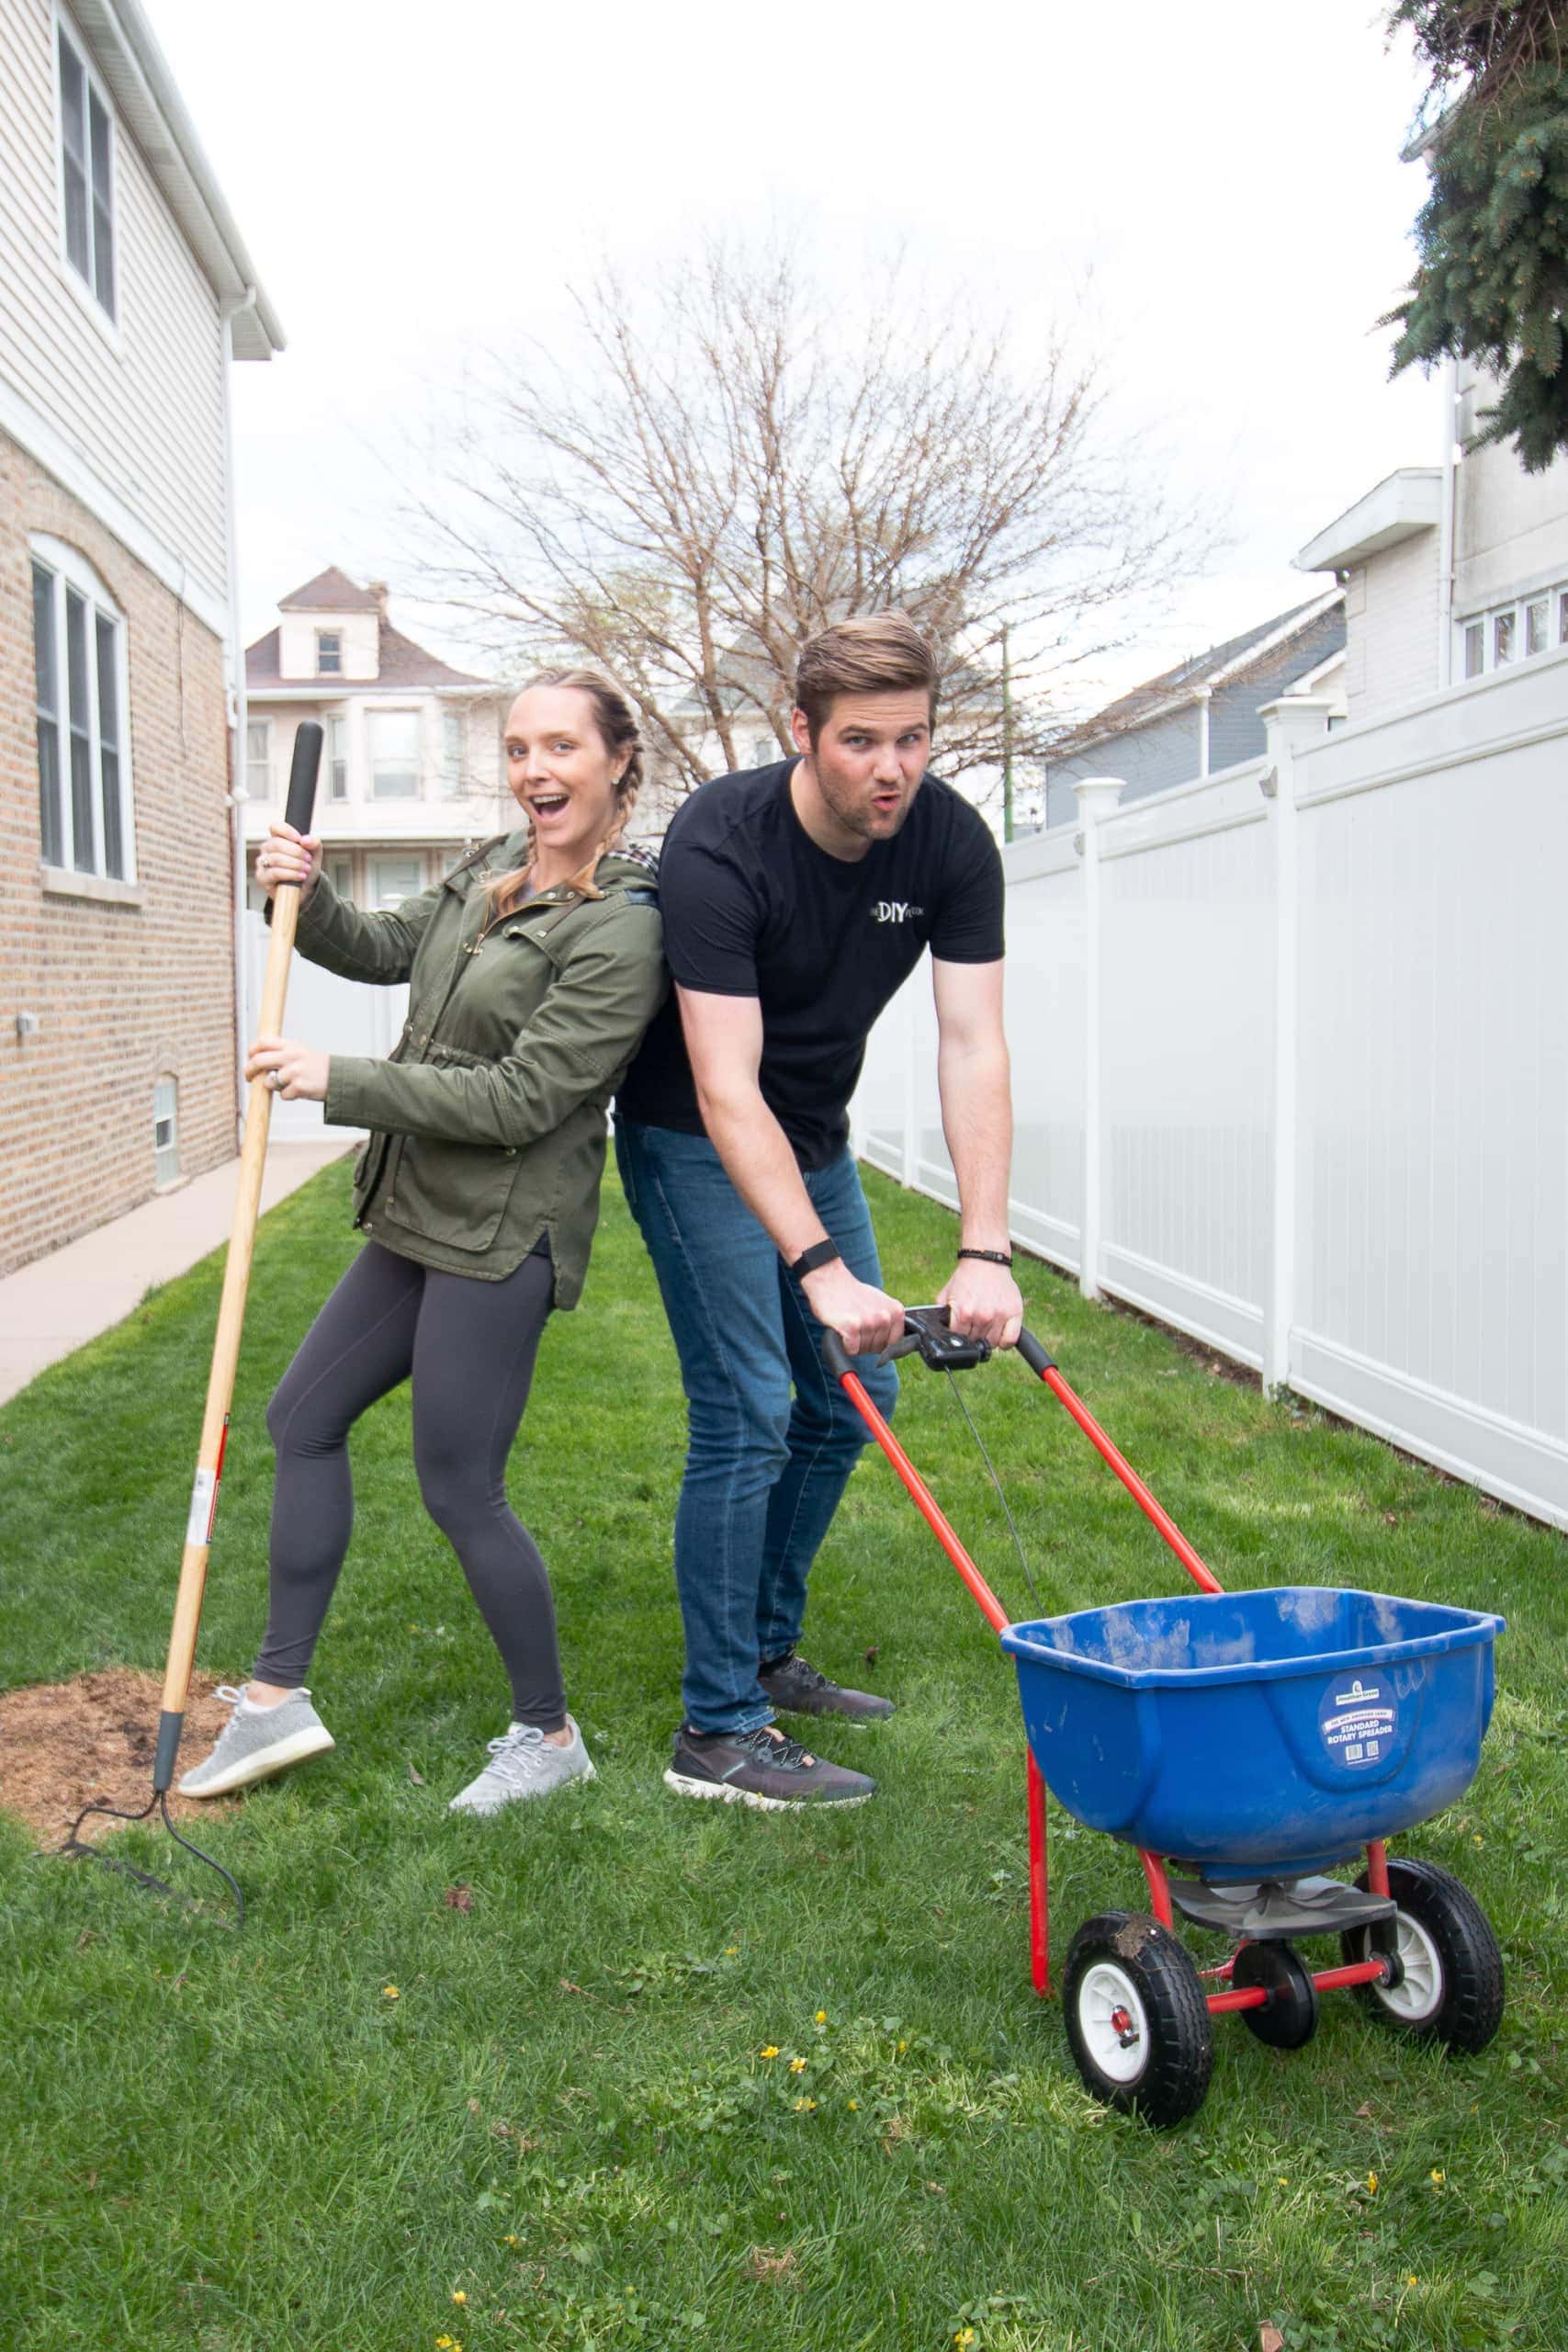 Our best tips to prep your lawn for spring